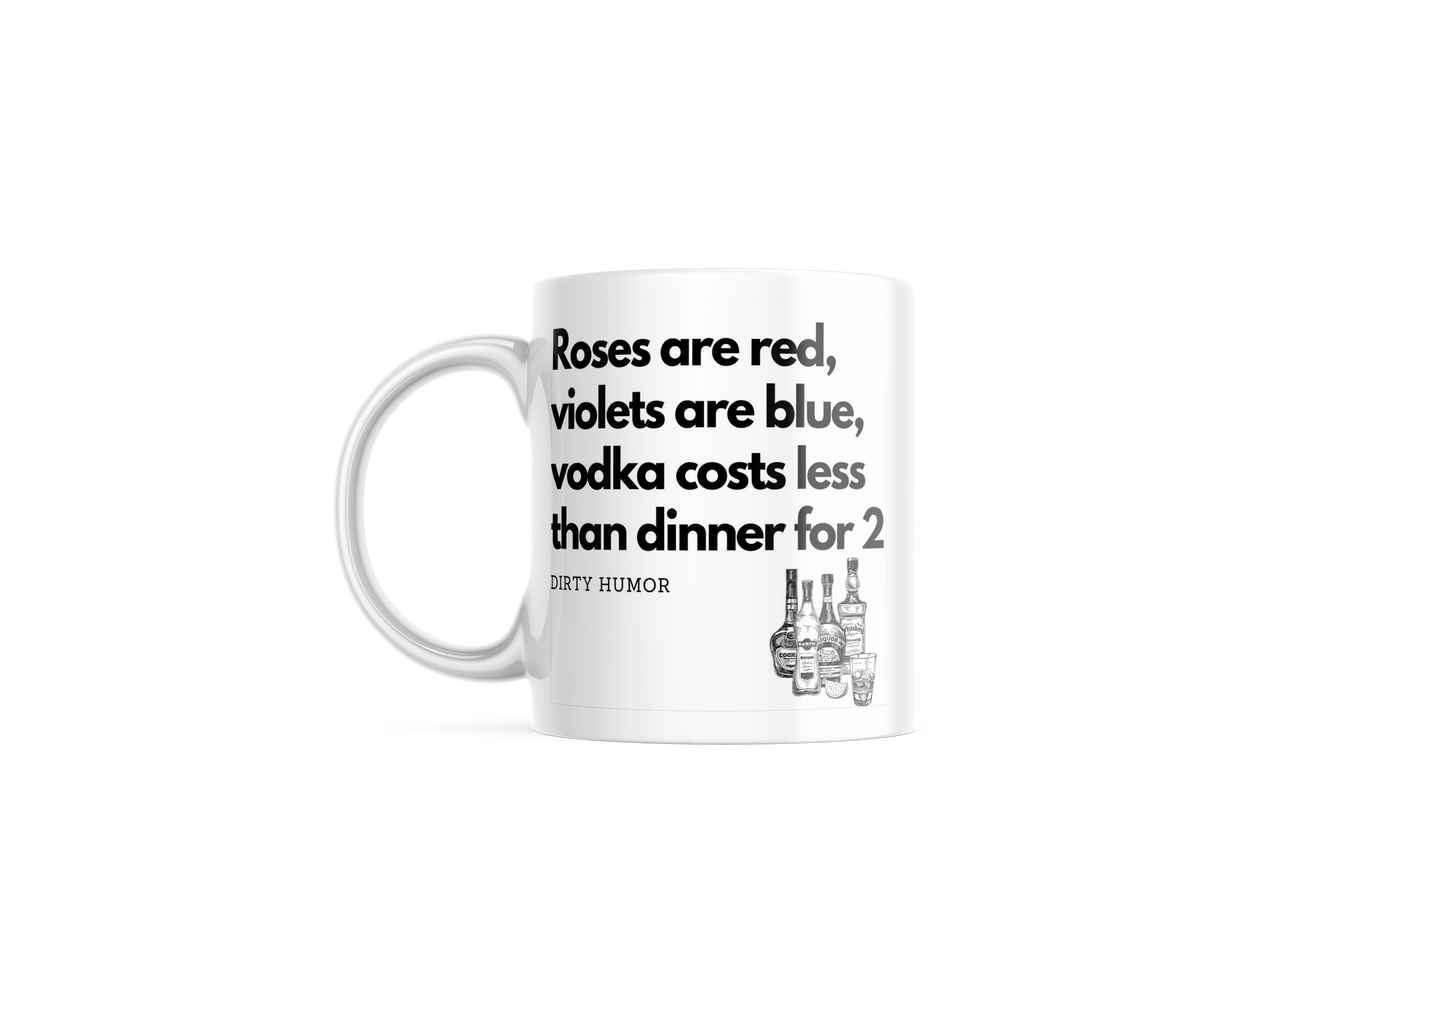 Roses are red, violets are blue, vodka costs less than dinner for 2.